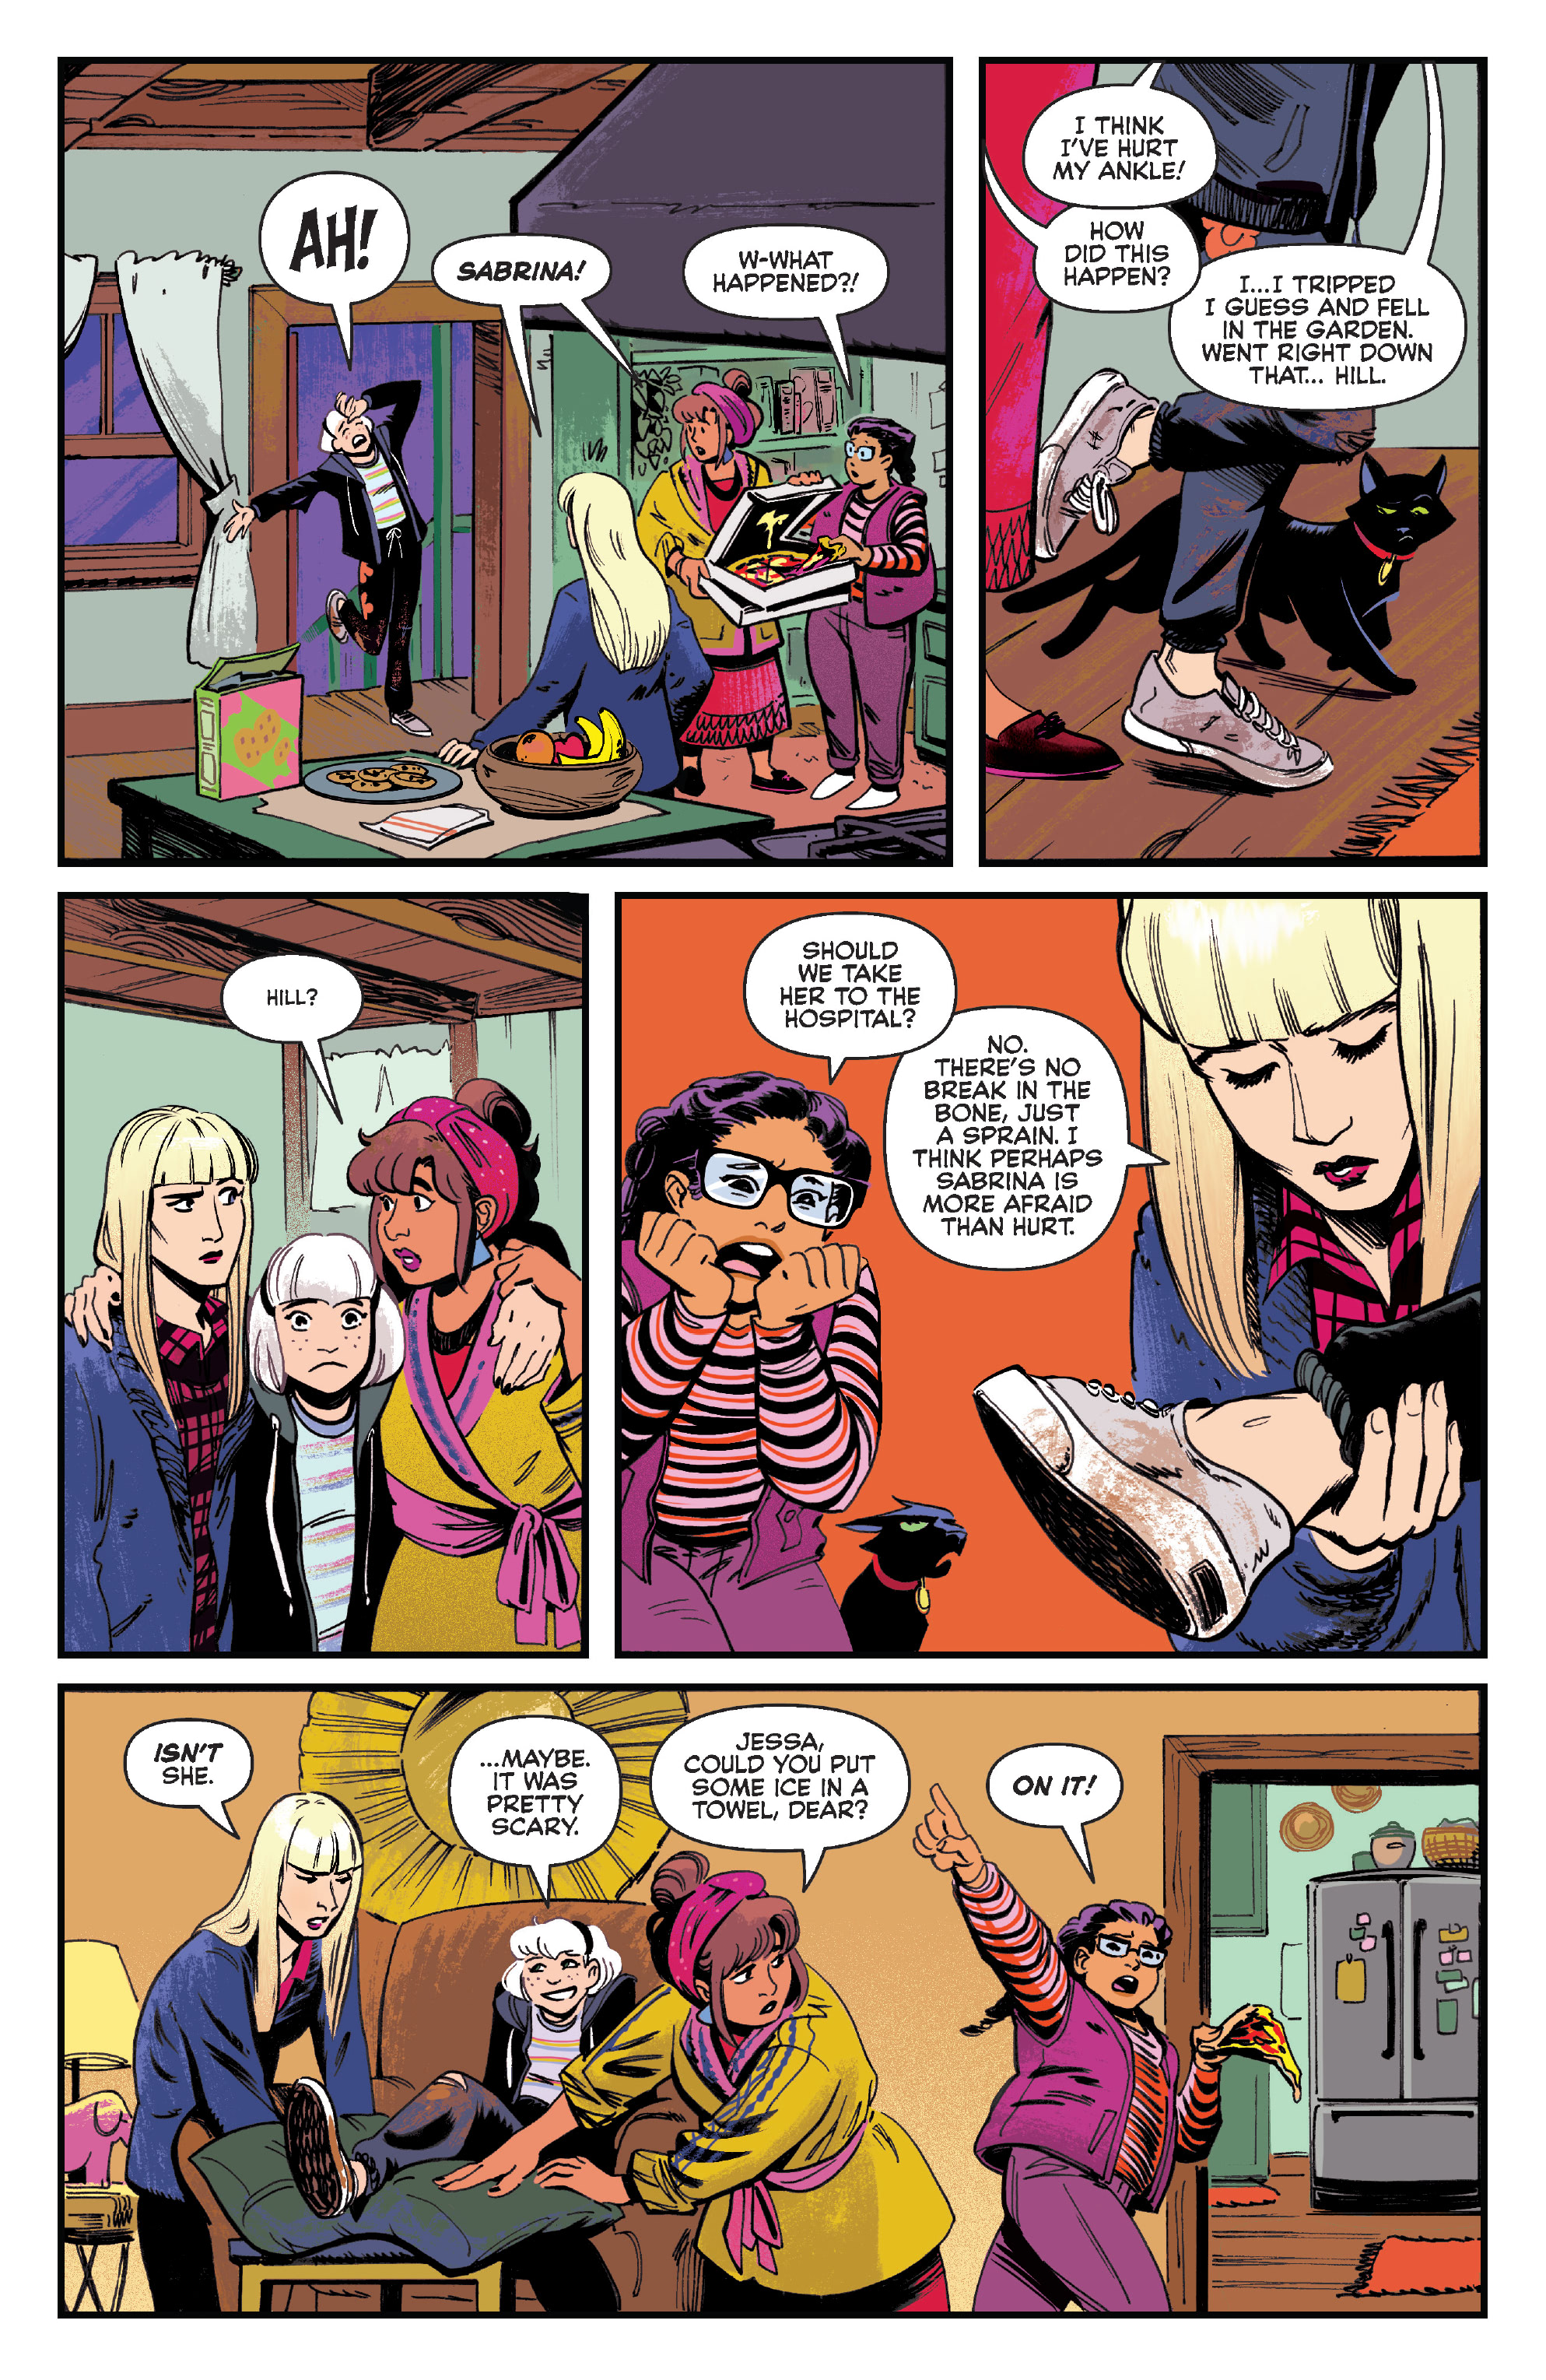 Sabrina: Something Wicked (2020-): Chapter 4 - Page 4